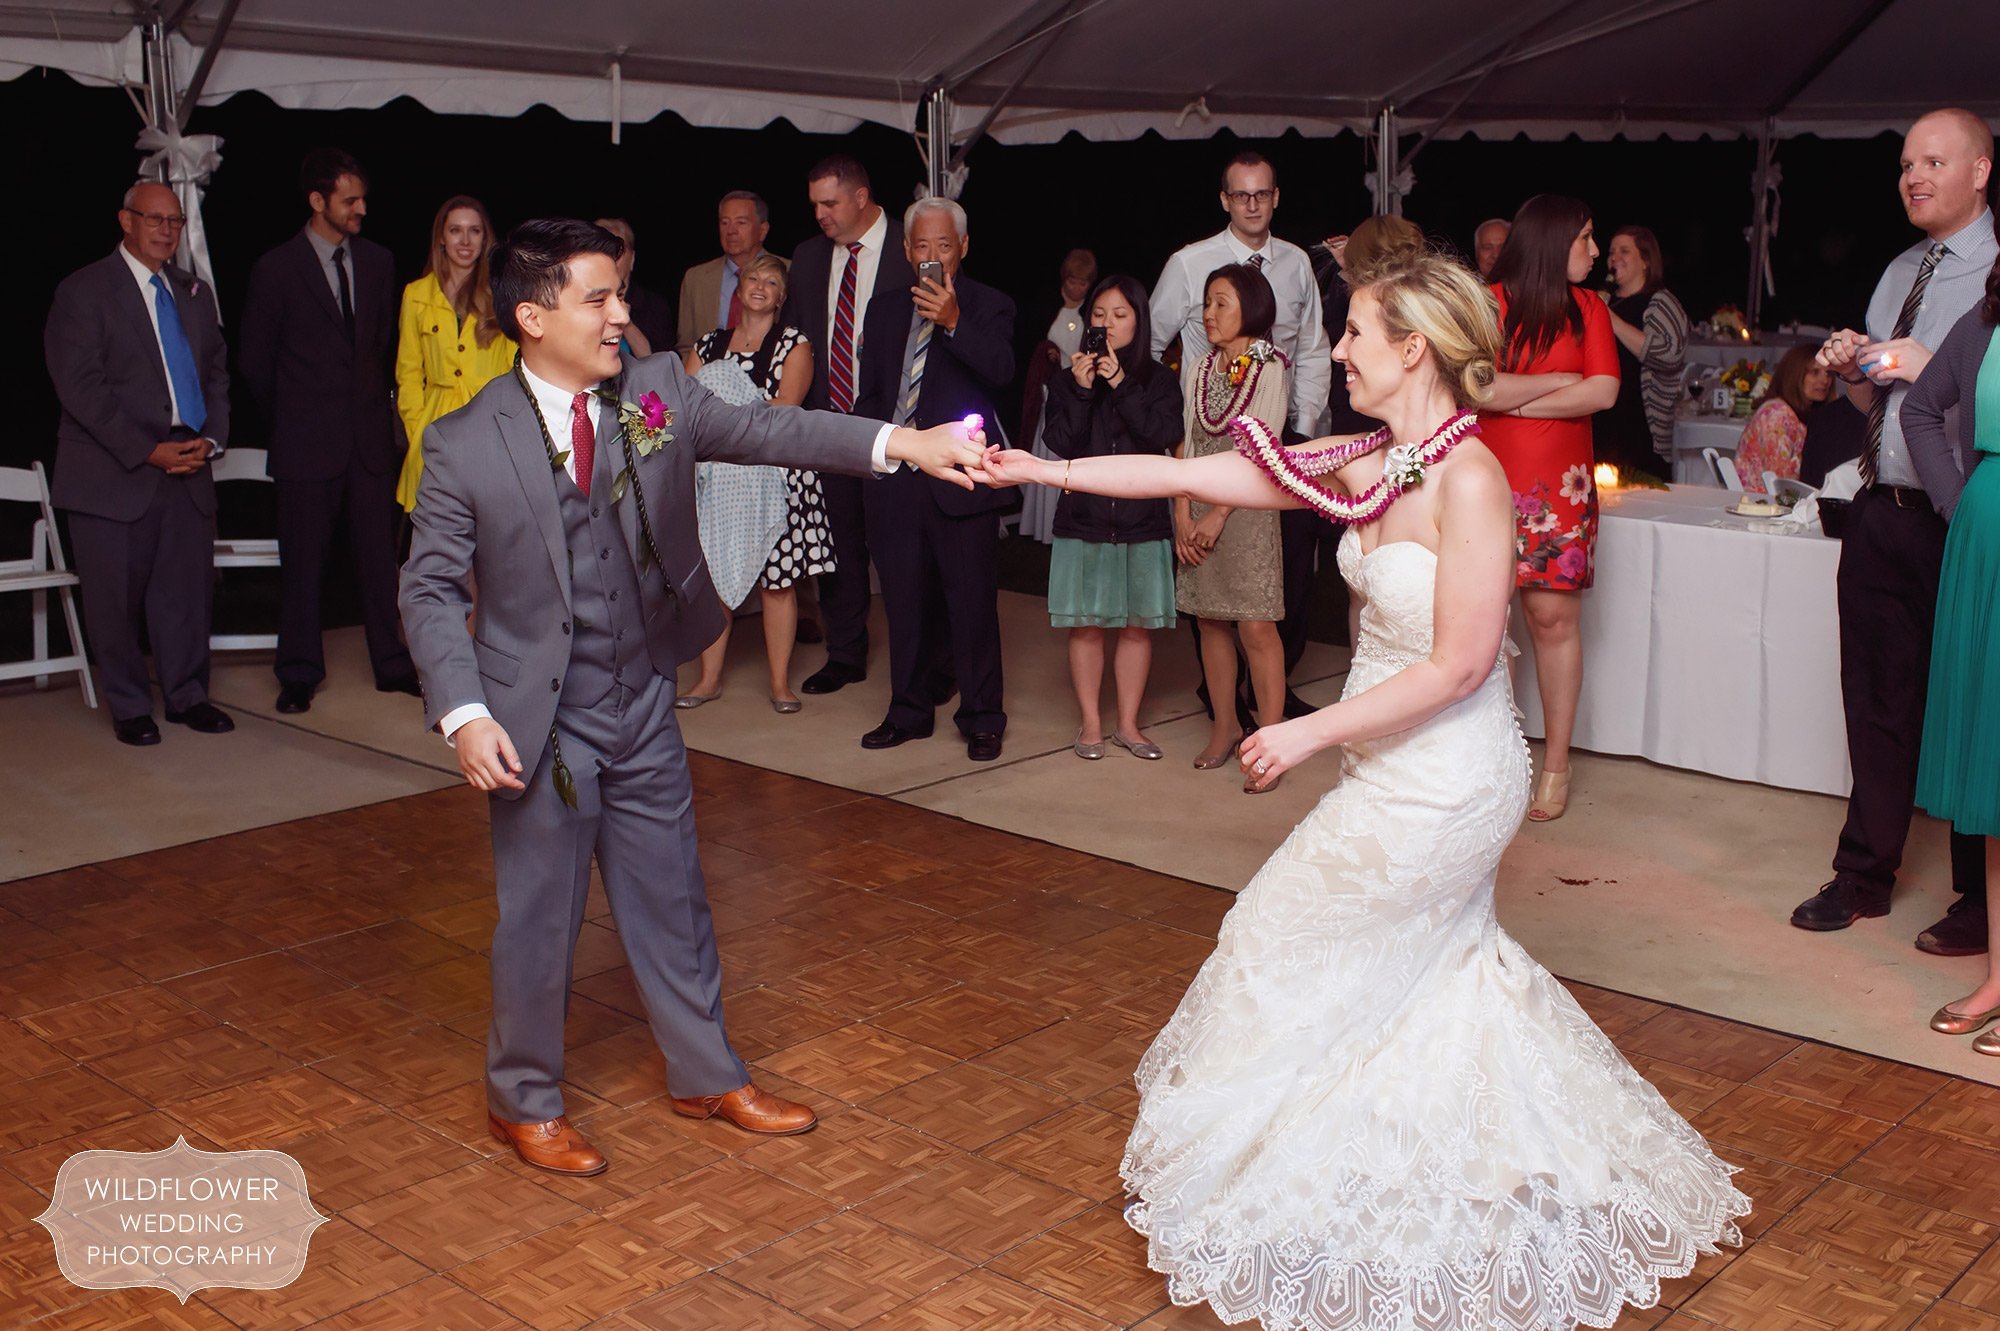 The bride and groom have their first dance at this Missouri backyard wedding in St. Louis.